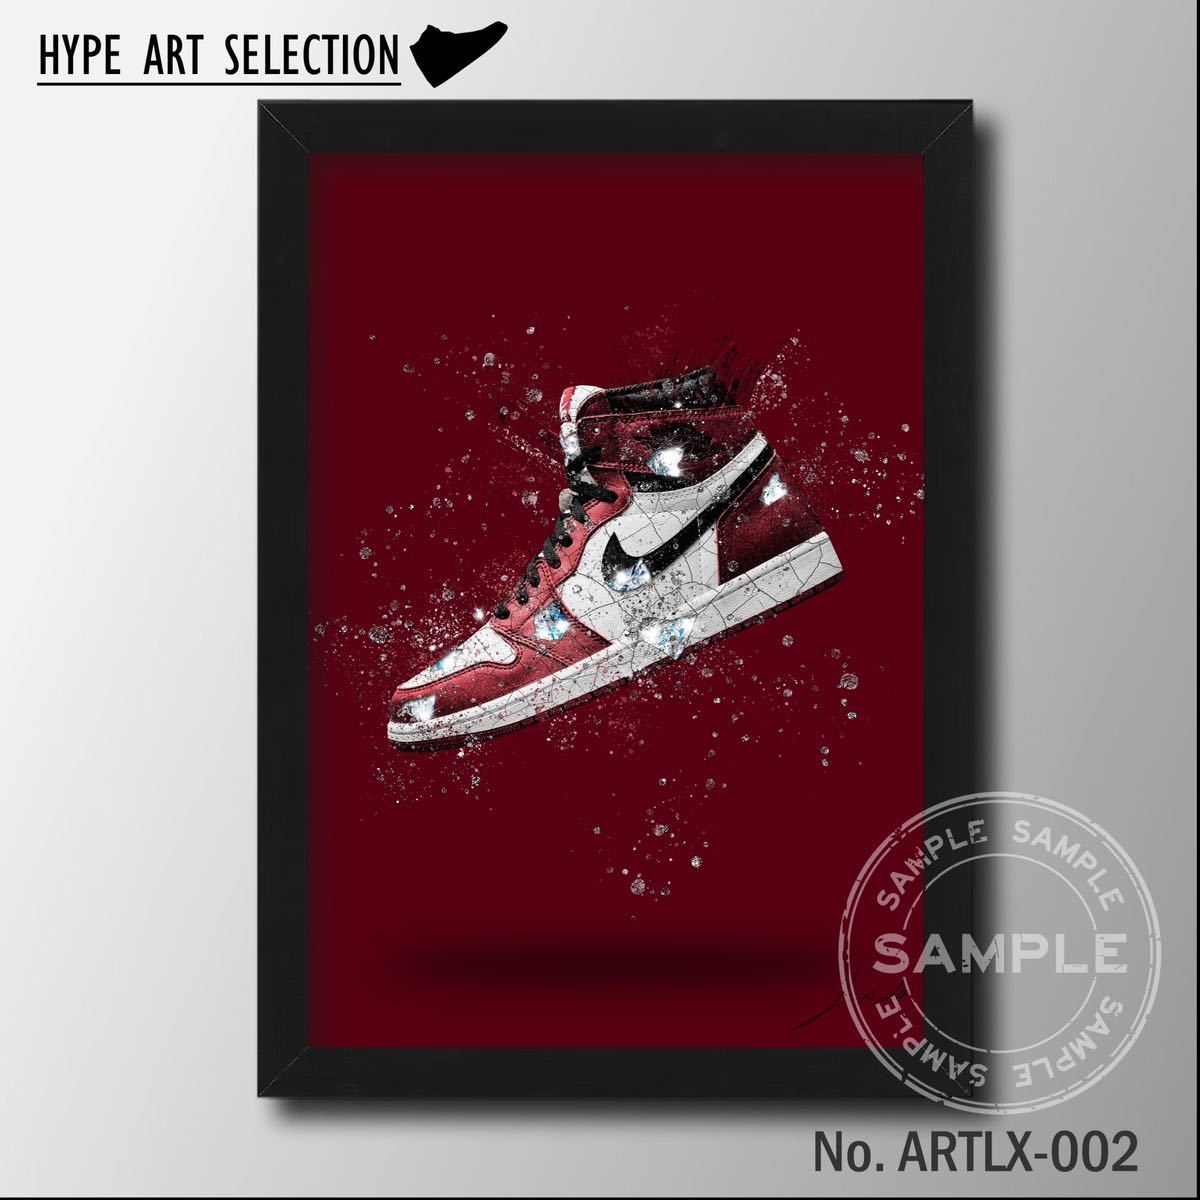 Sneaker art poster/Nike Air Jordan 1 Lost & Found/Chicago/Homage/Interior/Fashion/Street/NIKE, handmade works, interior, miscellaneous goods, others